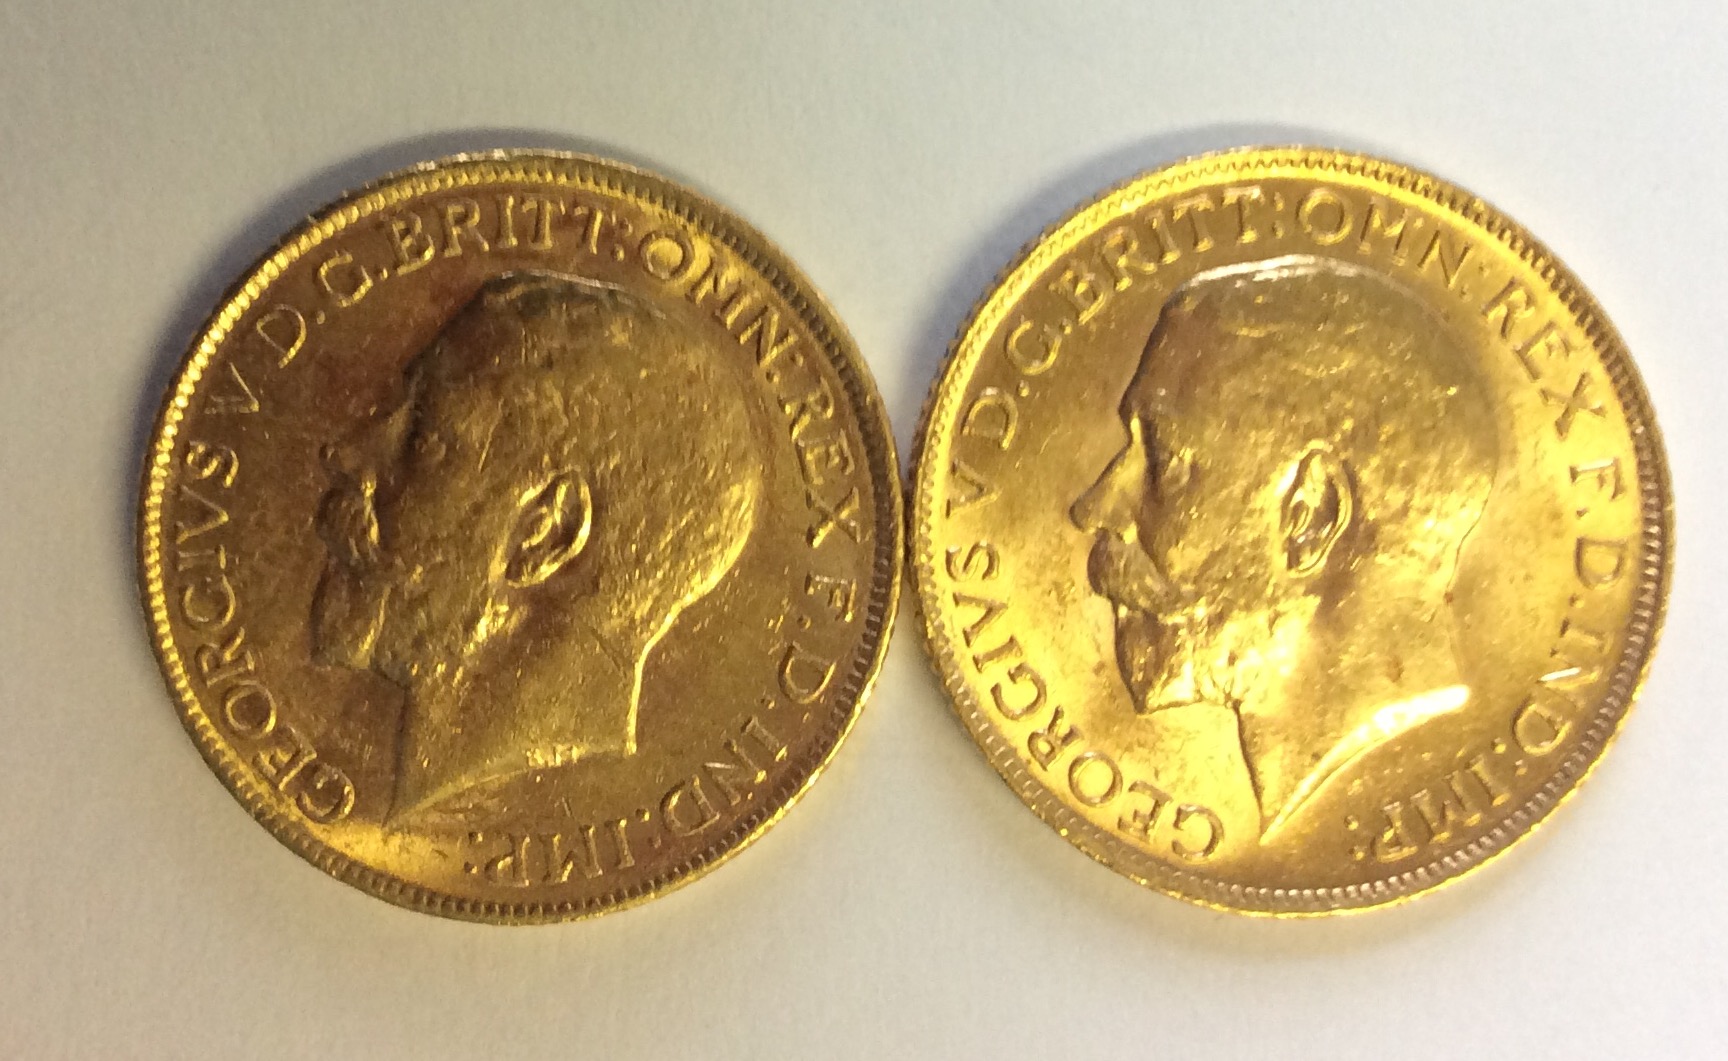 TWO EARLY 20TH CENTURY 22CT GOLD SOVEREIGN COINS Both dated 1912 and having a portrait of King